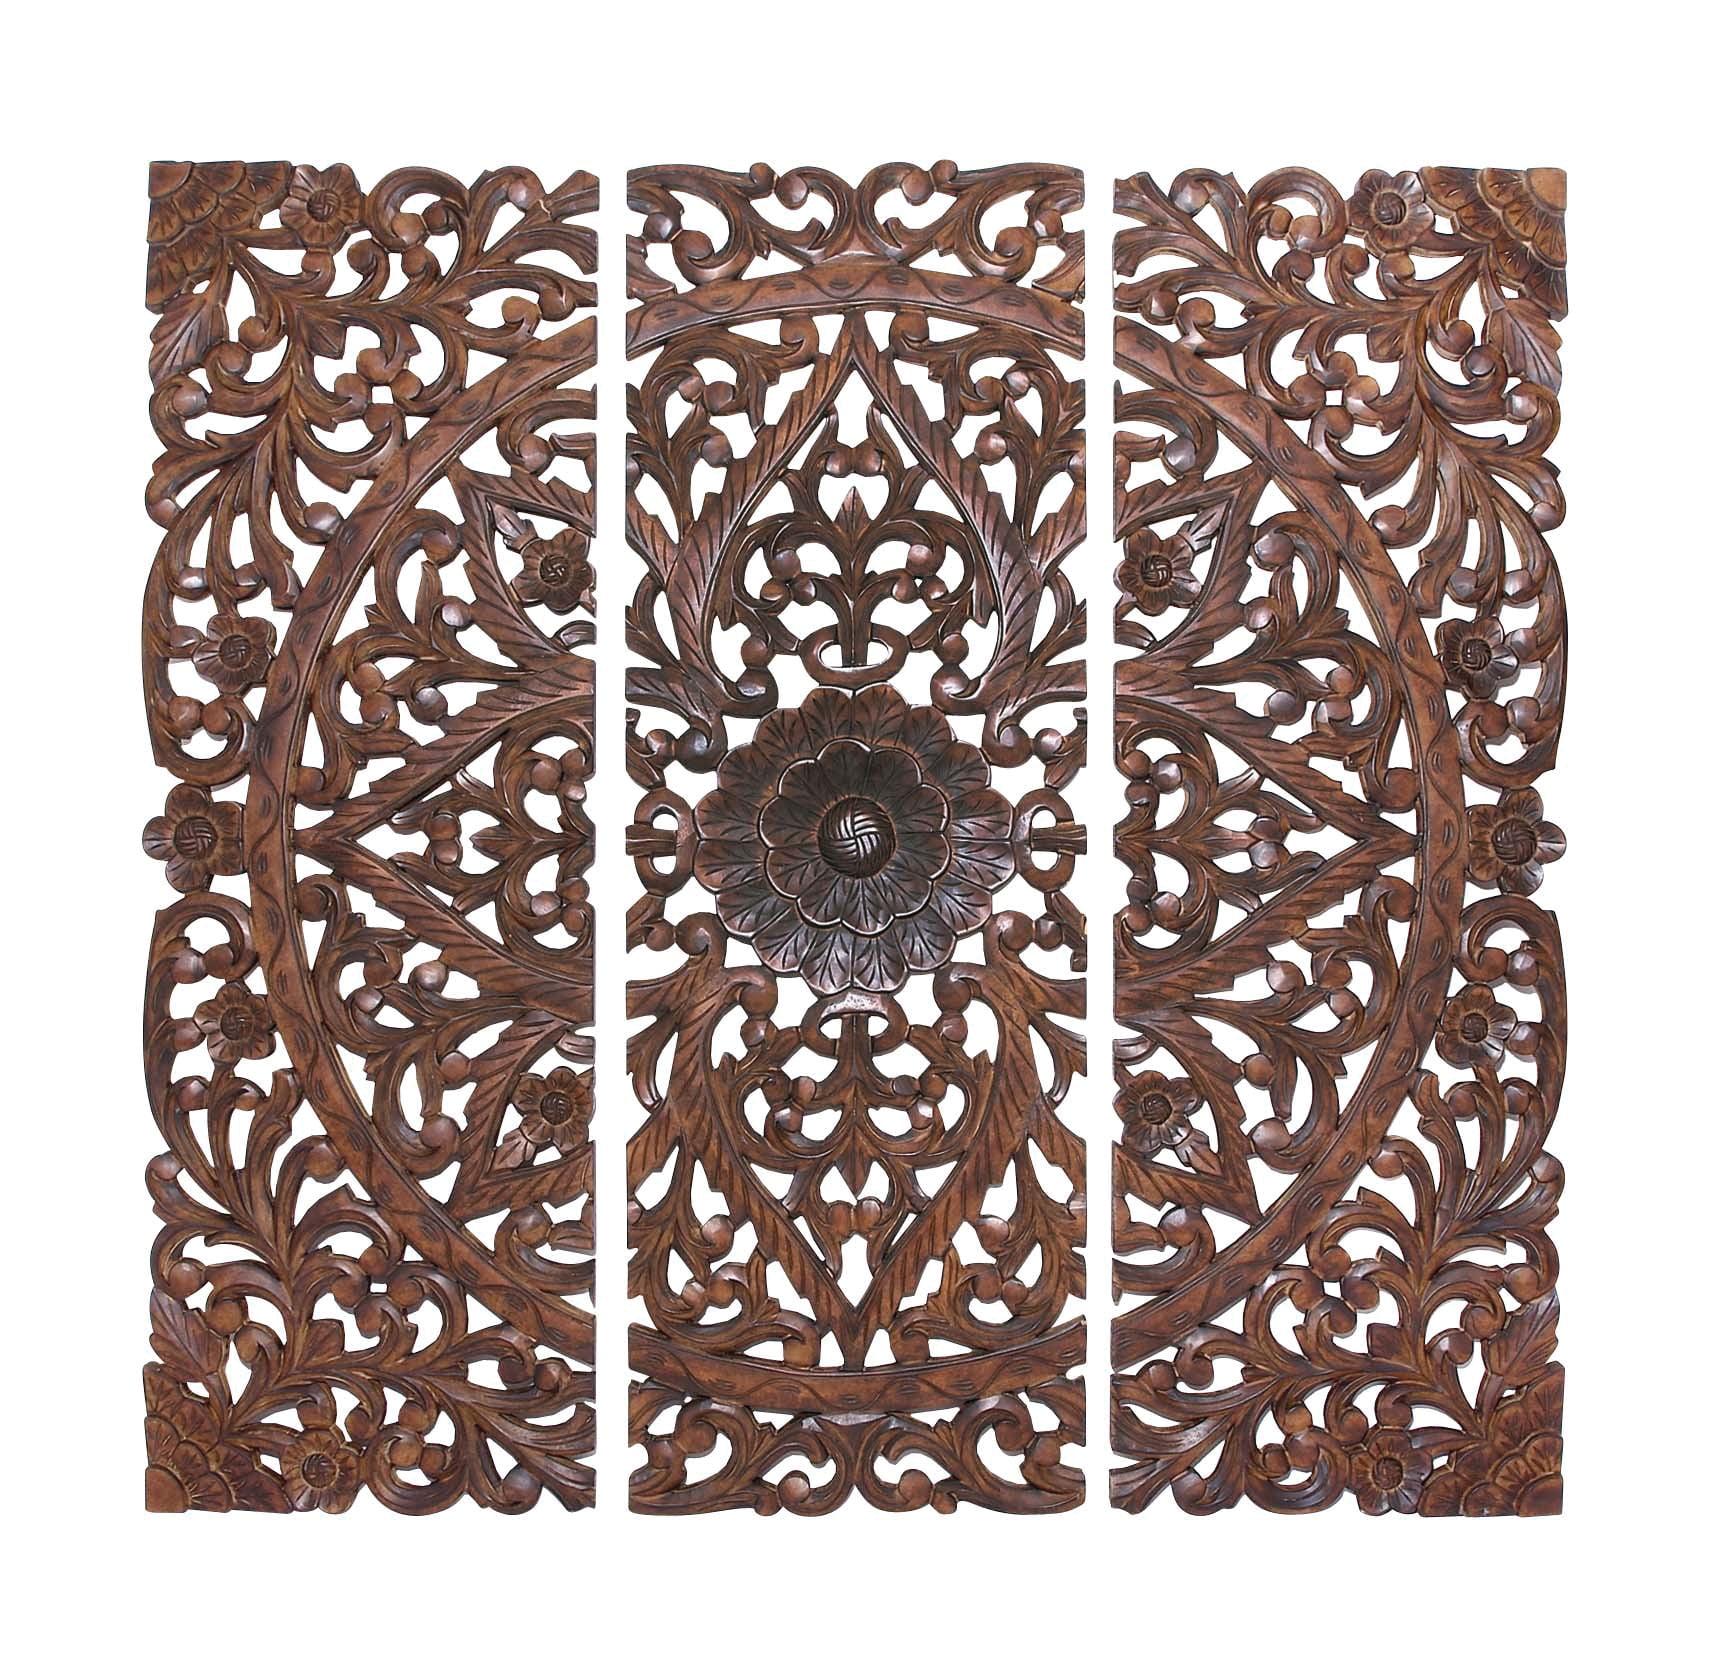 Rustic Elegance Hand-Carved Pine Wood Floral Wall Art Trio, 24"W x 72"H